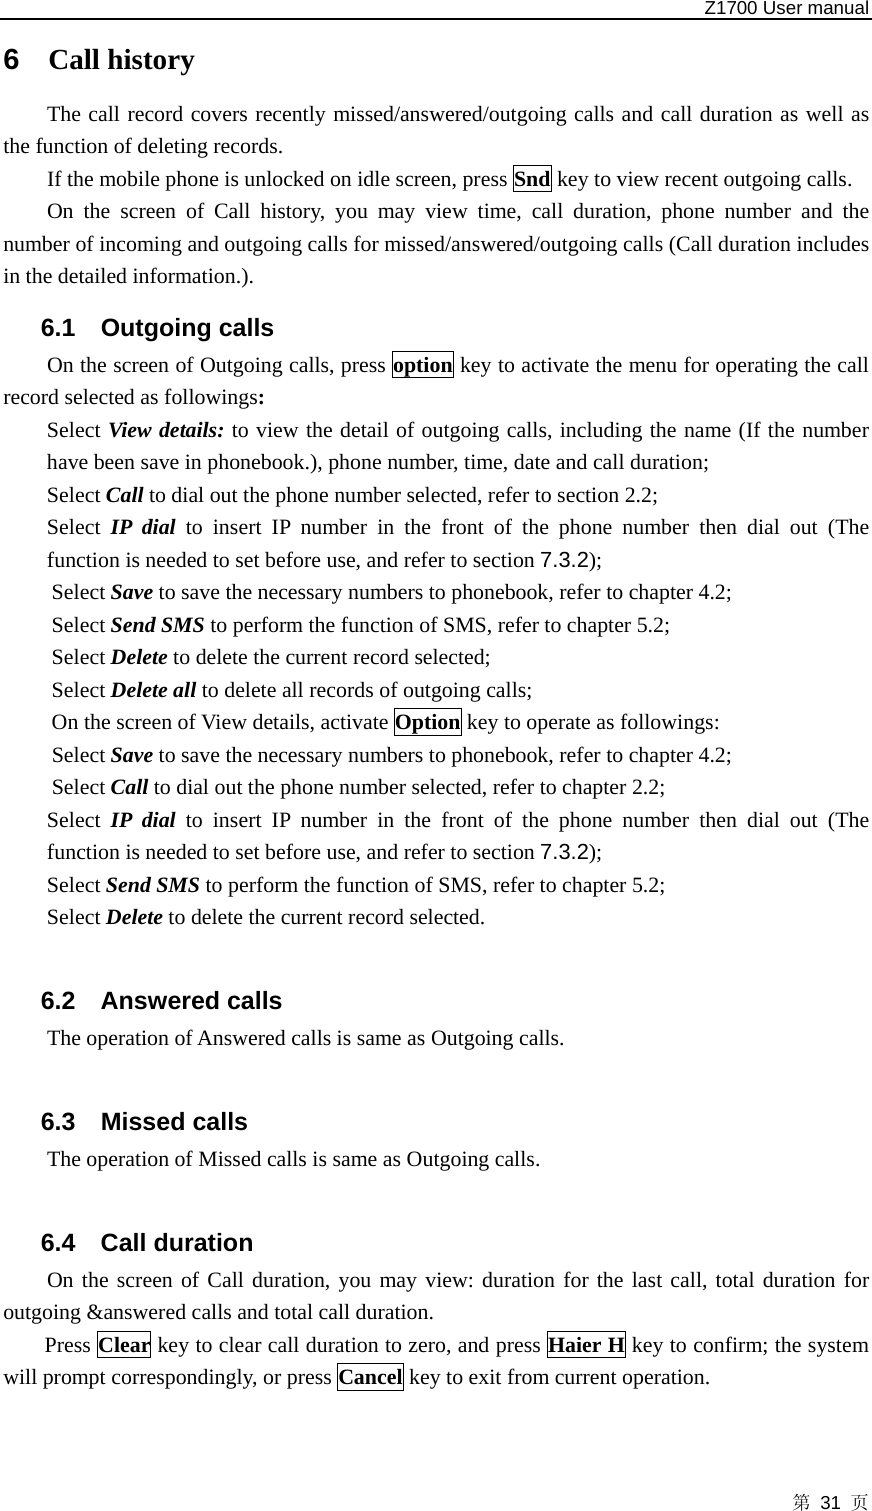   Z1700 User manual 第 31 页 6  Call history The call record covers recently missed/answered/outgoing calls and call duration as well as the function of deleting records.   If the mobile phone is unlocked on idle screen, press Snd key to view recent outgoing calls.   On the screen of Call history, you may view time, call duration, phone number and the number of incoming and outgoing calls for missed/answered/outgoing calls (Call duration includes in the detailed information.). 6.1 Outgoing calls On the screen of Outgoing calls, press option key to activate the menu for operating the call record selected as followings: Select View details: to view the detail of outgoing calls, including the name (If the number have been save in phonebook.), phone number, time, date and call duration; Select Call to dial out the phone number selected, refer to section 2.2;   Select IP dial to insert IP number in the front of the phone number then dial out (The function is needed to set before use, and refer to section 7.3.2); Select Save to save the necessary numbers to phonebook, refer to chapter 4.2;   Select Send SMS to perform the function of SMS, refer to chapter 5.2;   Select Delete to delete the current record selected;   Select Delete all to delete all records of outgoing calls;   On the screen of View details, activate Option key to operate as followings:   Select Save to save the necessary numbers to phonebook, refer to chapter 4.2;   Select Call to dial out the phone number selected, refer to chapter 2.2;   Select IP dial to insert IP number in the front of the phone number then dial out (The function is needed to set before use, and refer to section 7.3.2); Select Send SMS to perform the function of SMS, refer to chapter 5.2;   Select Delete to delete the current record selected.  6.2 Answered calls The operation of Answered calls is same as Outgoing calls.  6.3 Missed calls The operation of Missed calls is same as Outgoing calls.  6.4 Call duration On the screen of Call duration, you may view: duration for the last call, total duration for outgoing &amp;answered calls and total call duration.   Press Clear key to clear call duration to zero, and press Haier H key to confirm; the system will prompt correspondingly, or press Cancel key to exit from current operation.  